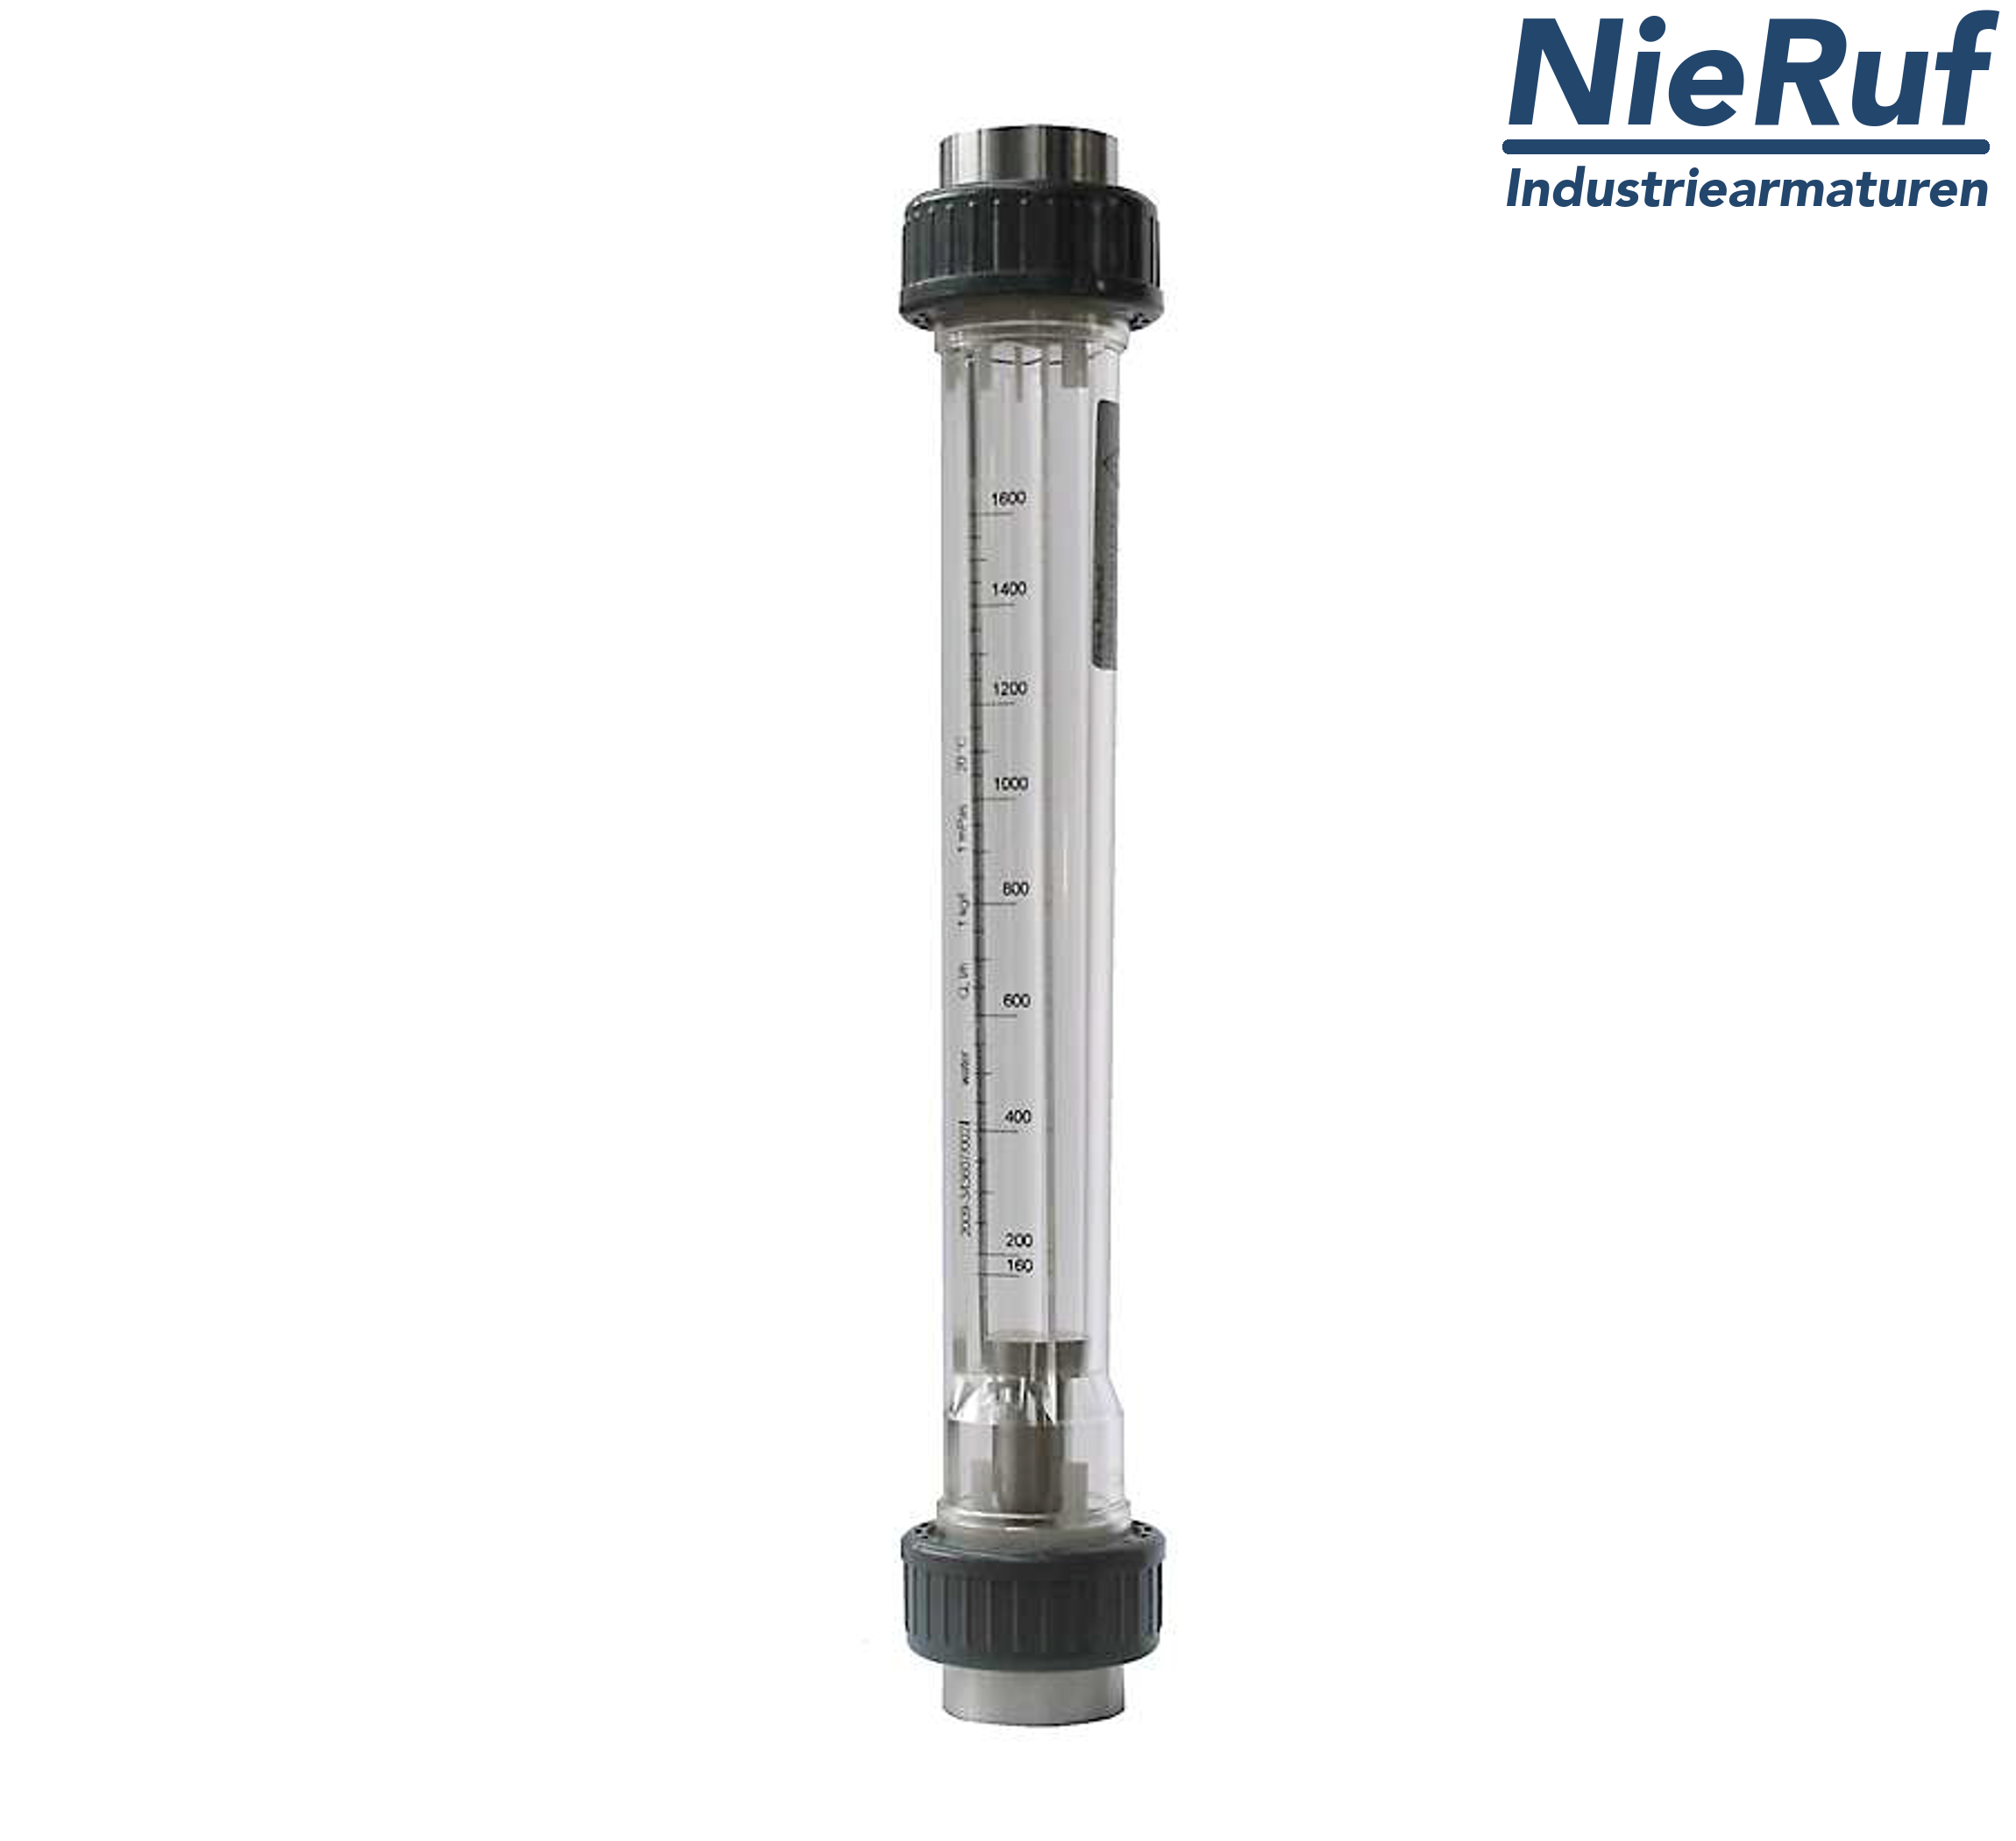 Variable area flowmeter 1 1/4" inch 4000.0 - 16000 l/h water NBR